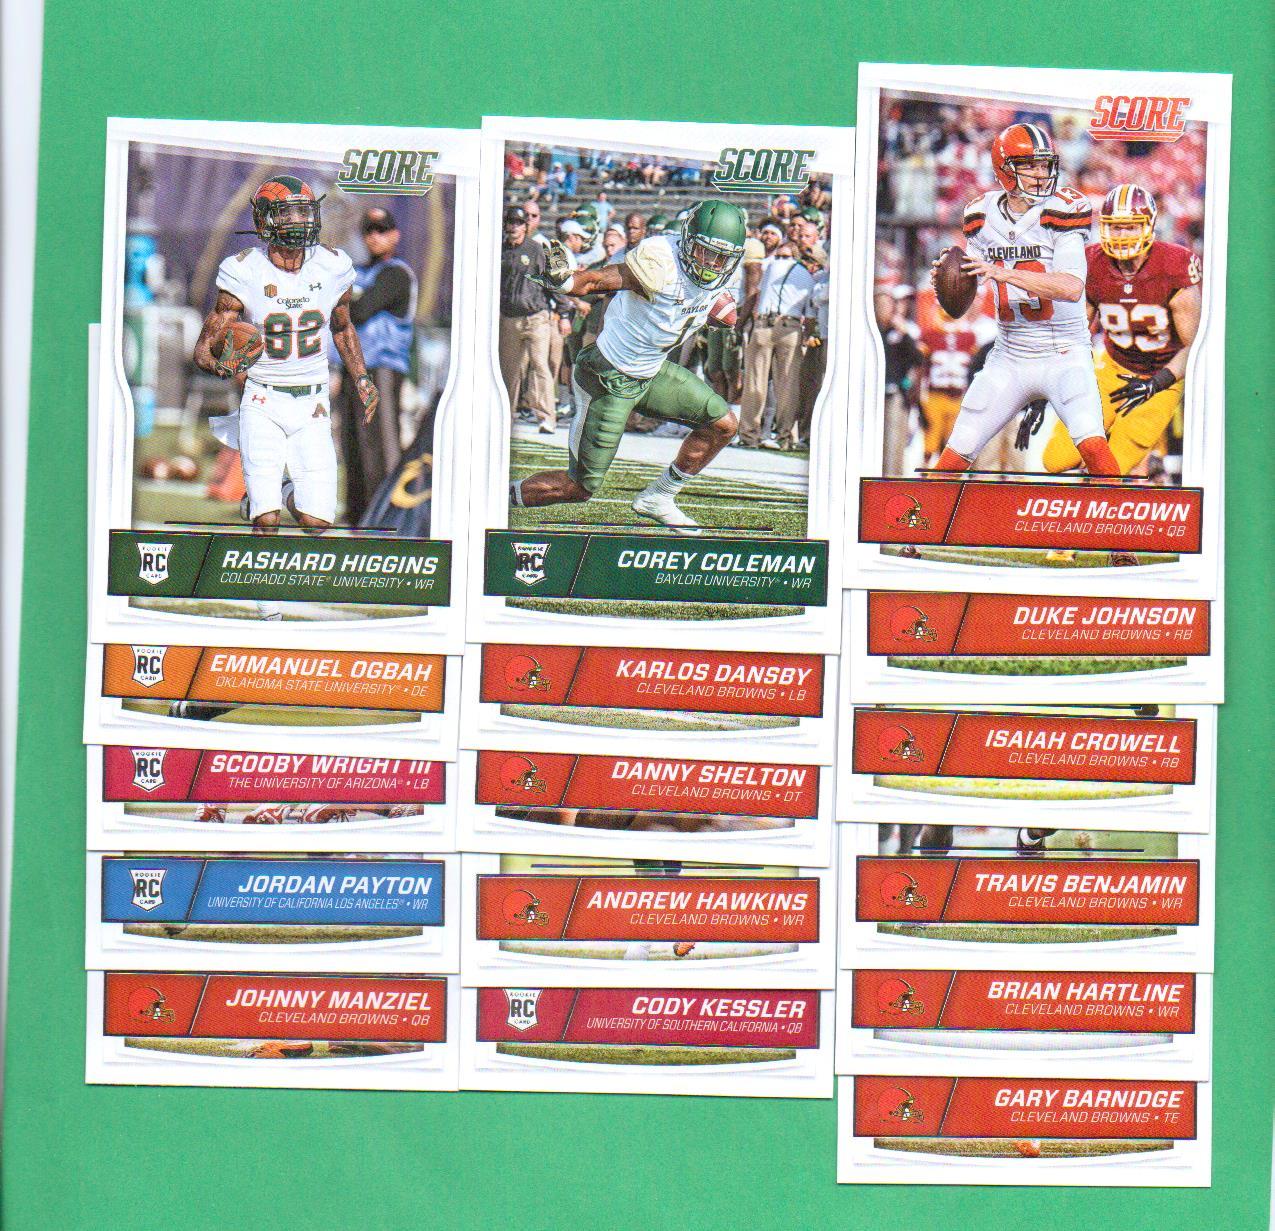 Primary image for 2016 Score Cleveland Browns Football Set